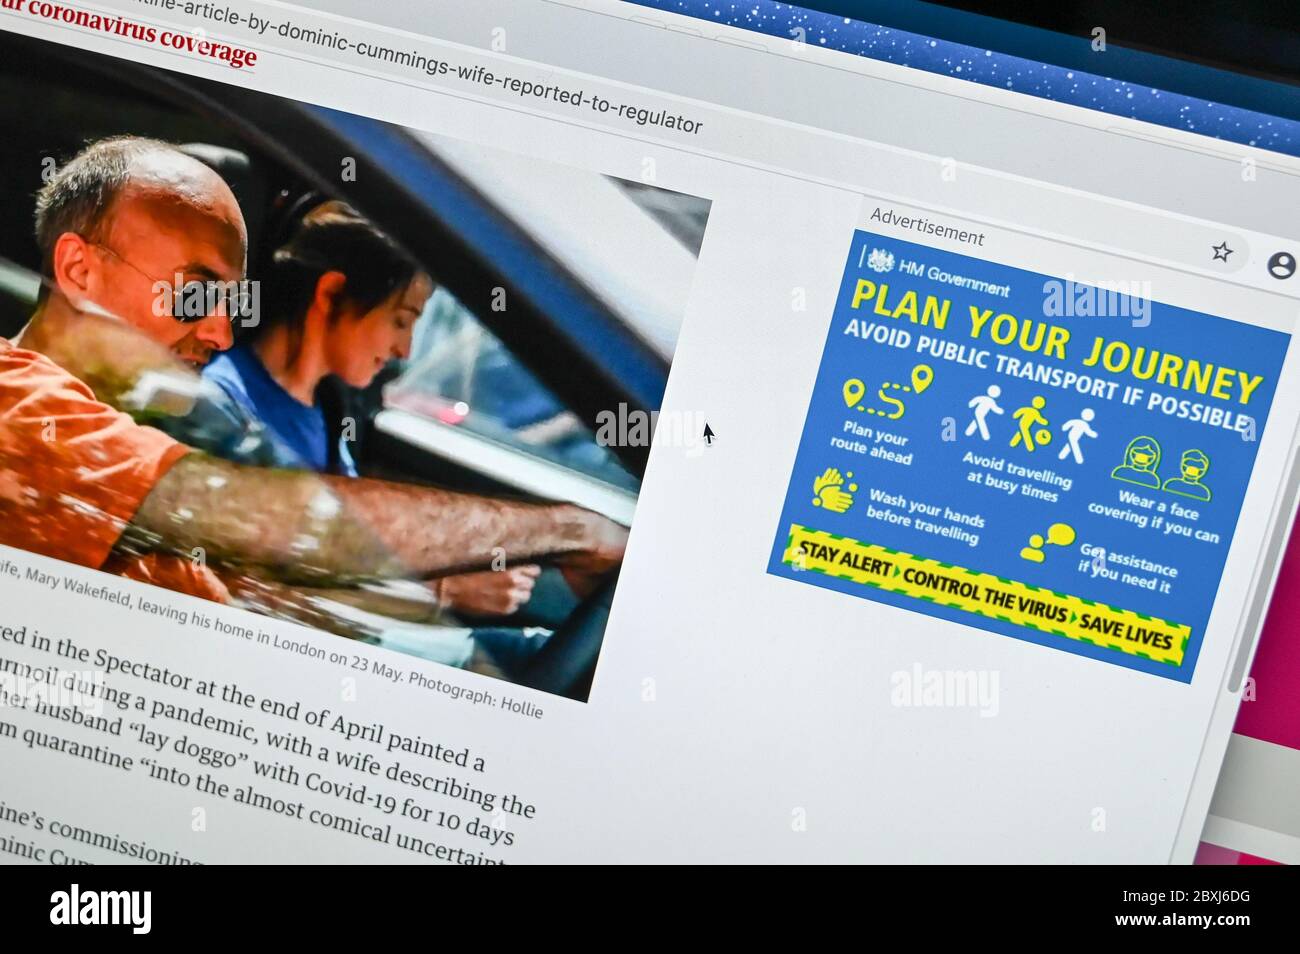 On line advert during the Covid-19 pandemic 'Plan your journey' juxtaposed against a press photo of Dominic Cummings driving a car. Stock Photo